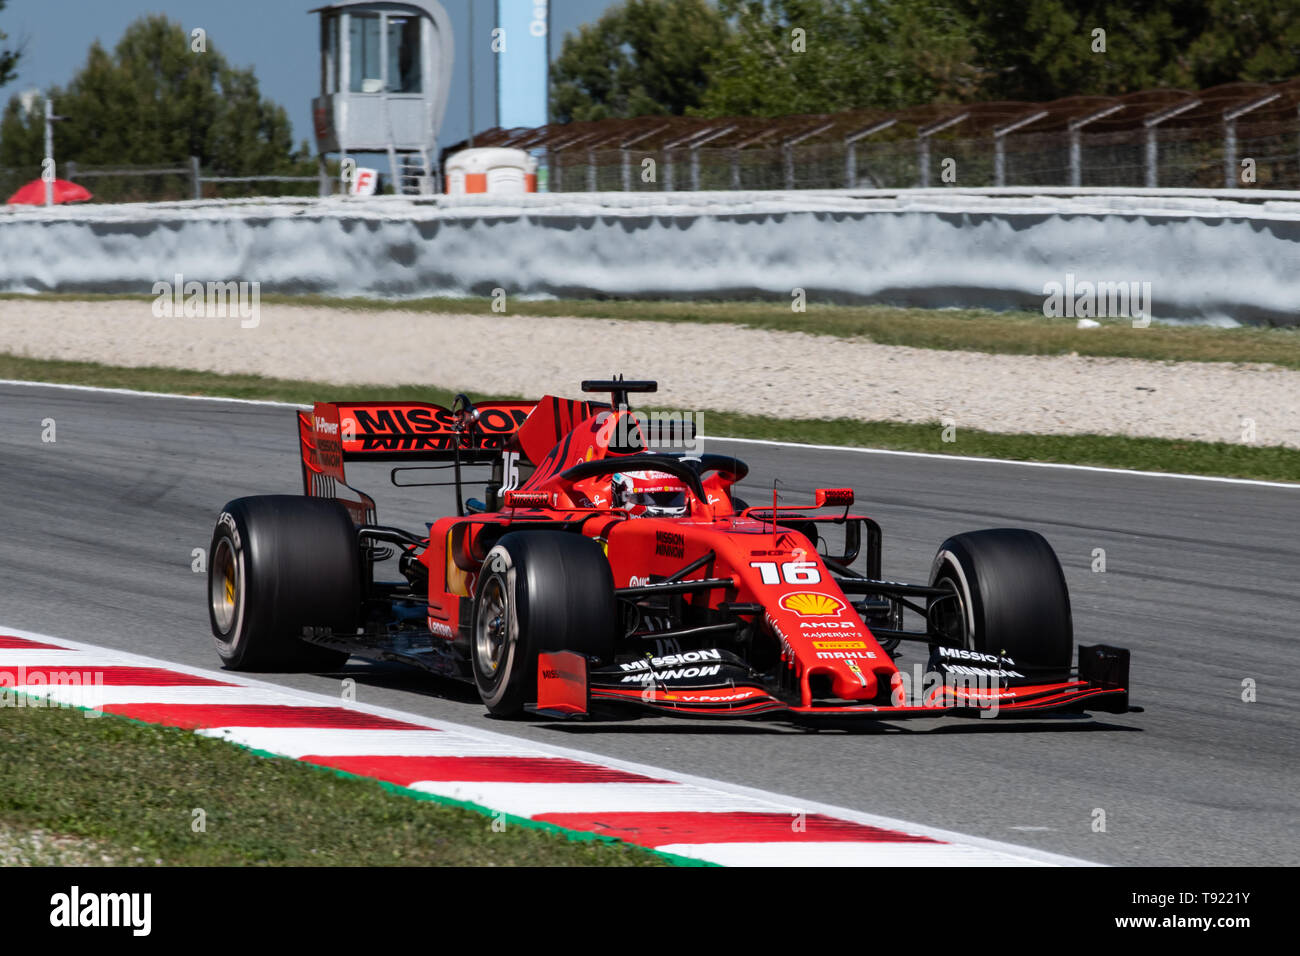 Barcelona, Spain. May 14th, 2019 - Charles Leclerc from Monaco 16 of Scuderia Ferrari on track at F1 2019 Test at Circuit de Catalunya. Stock Photo